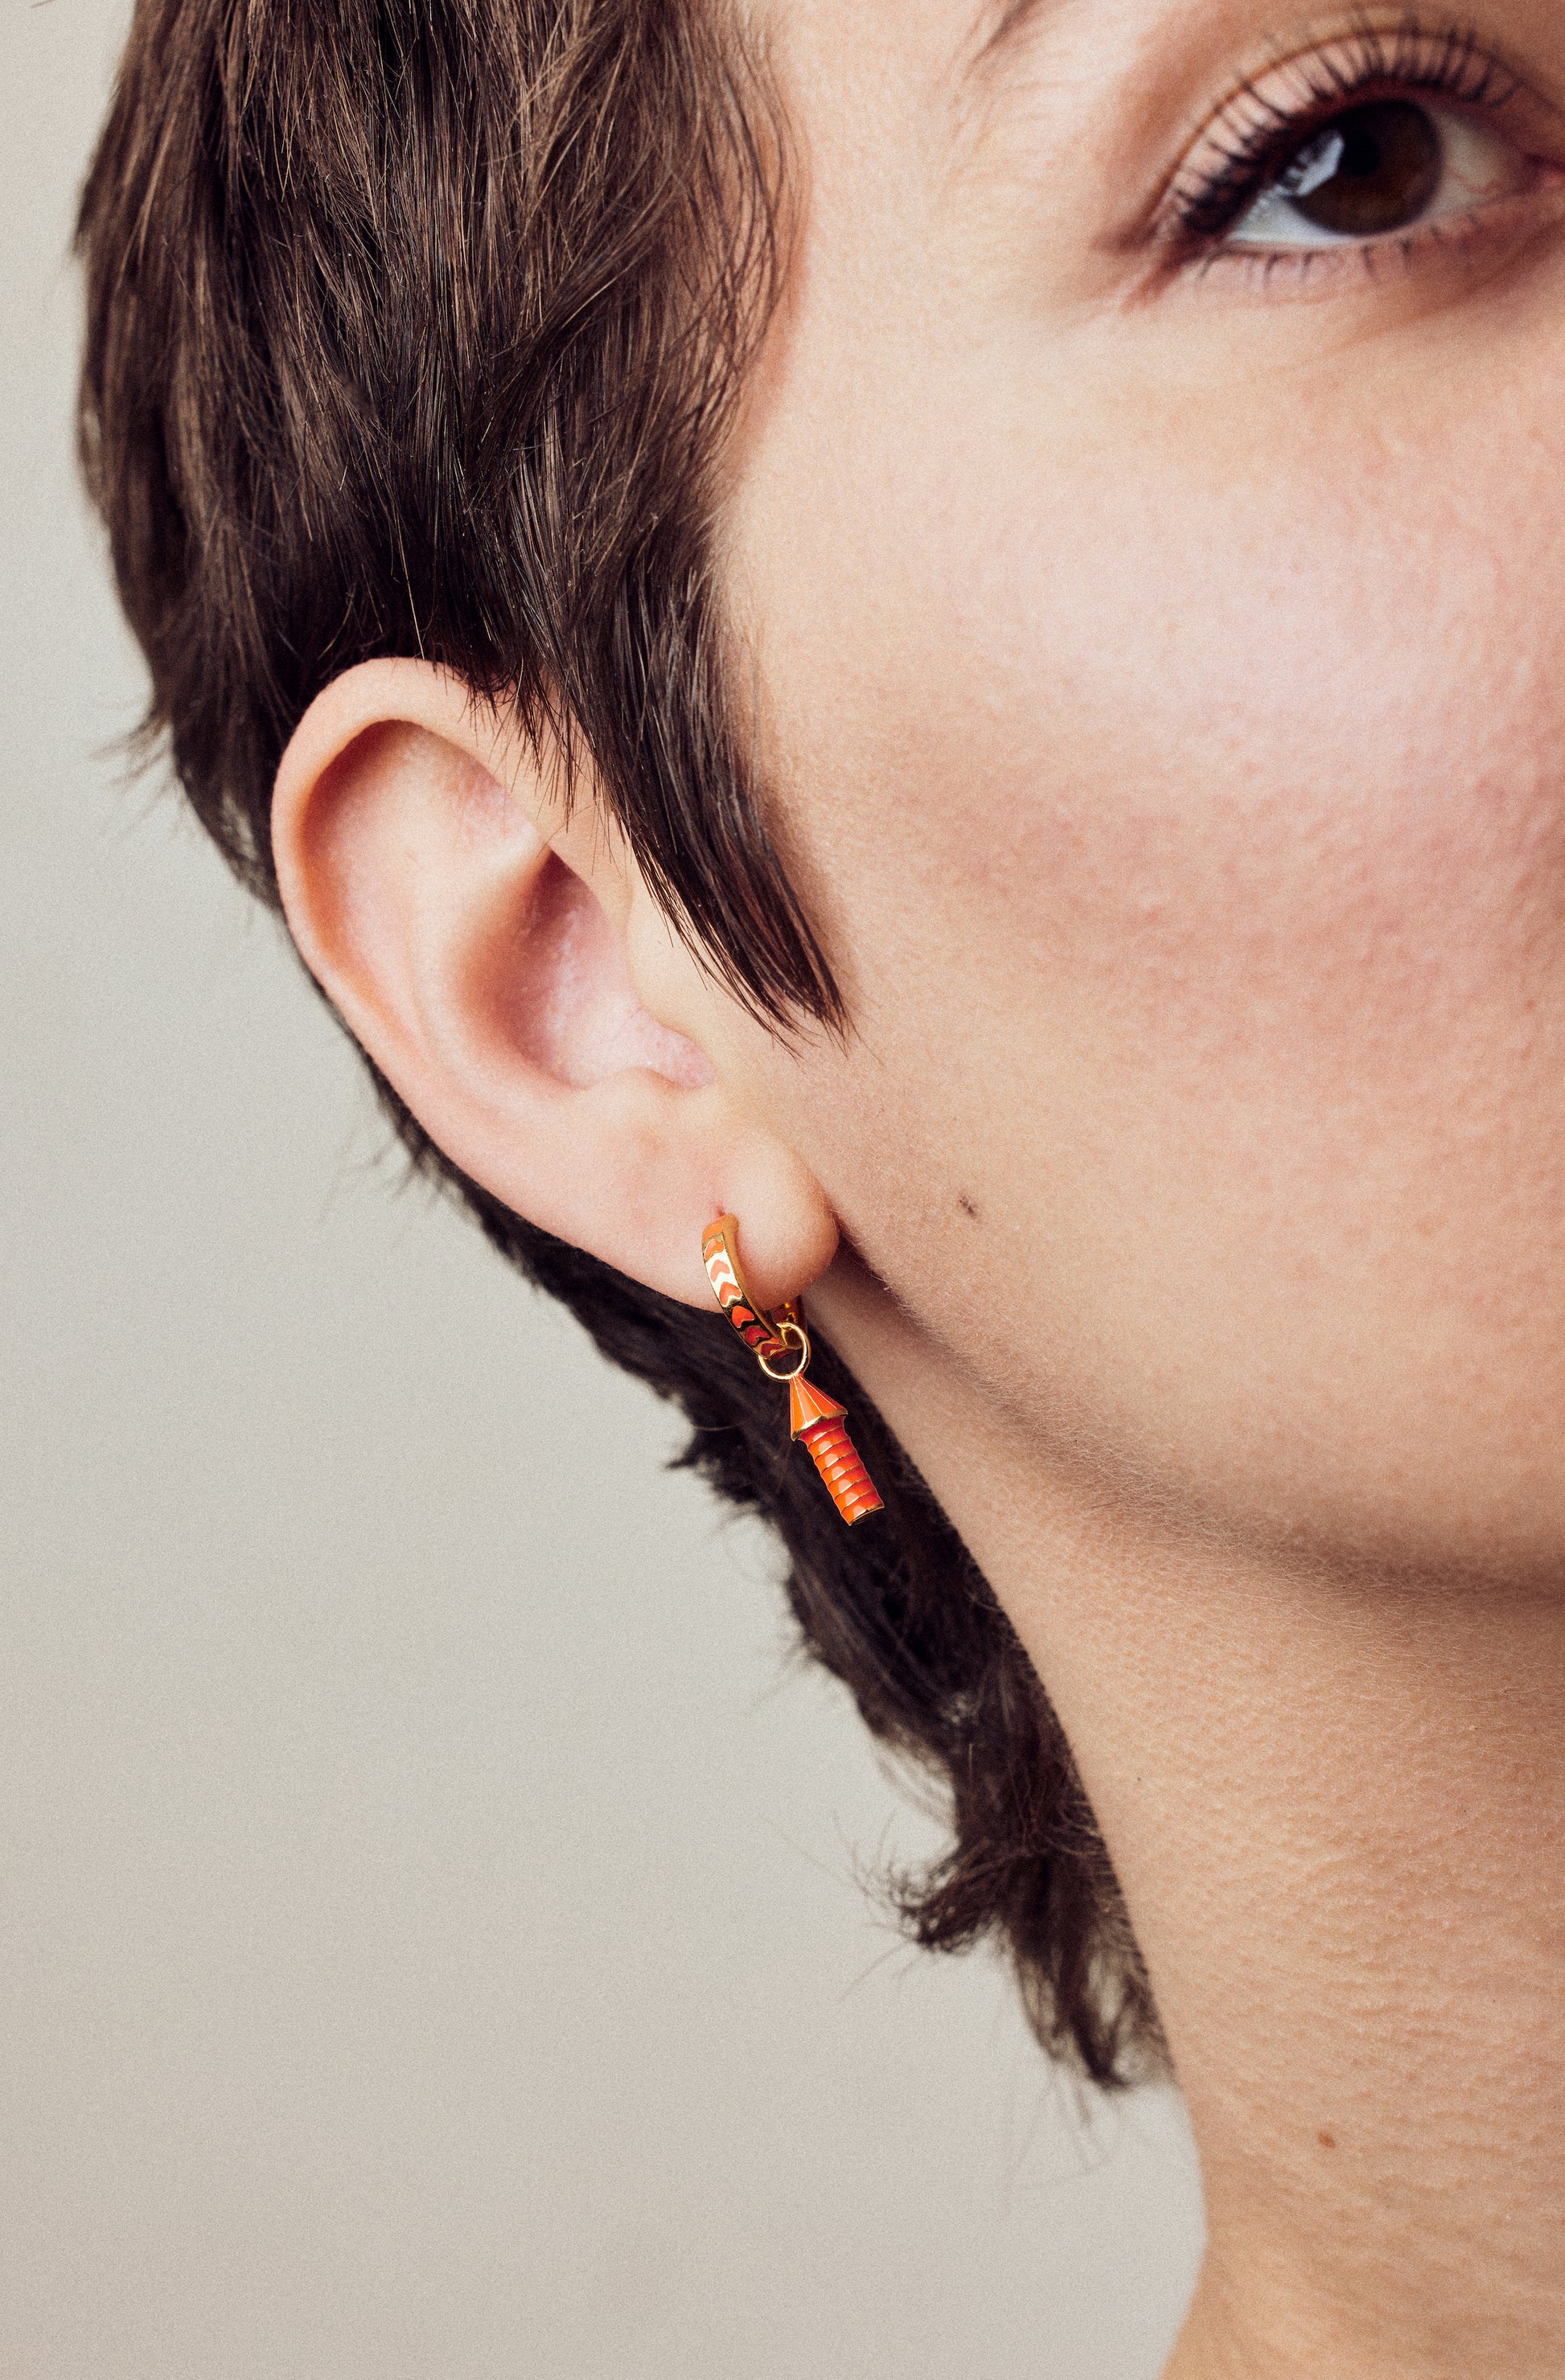 image of rocket enamel earrings in orange and gold shown close-up of ear and eye on model with white skin and short brown hair